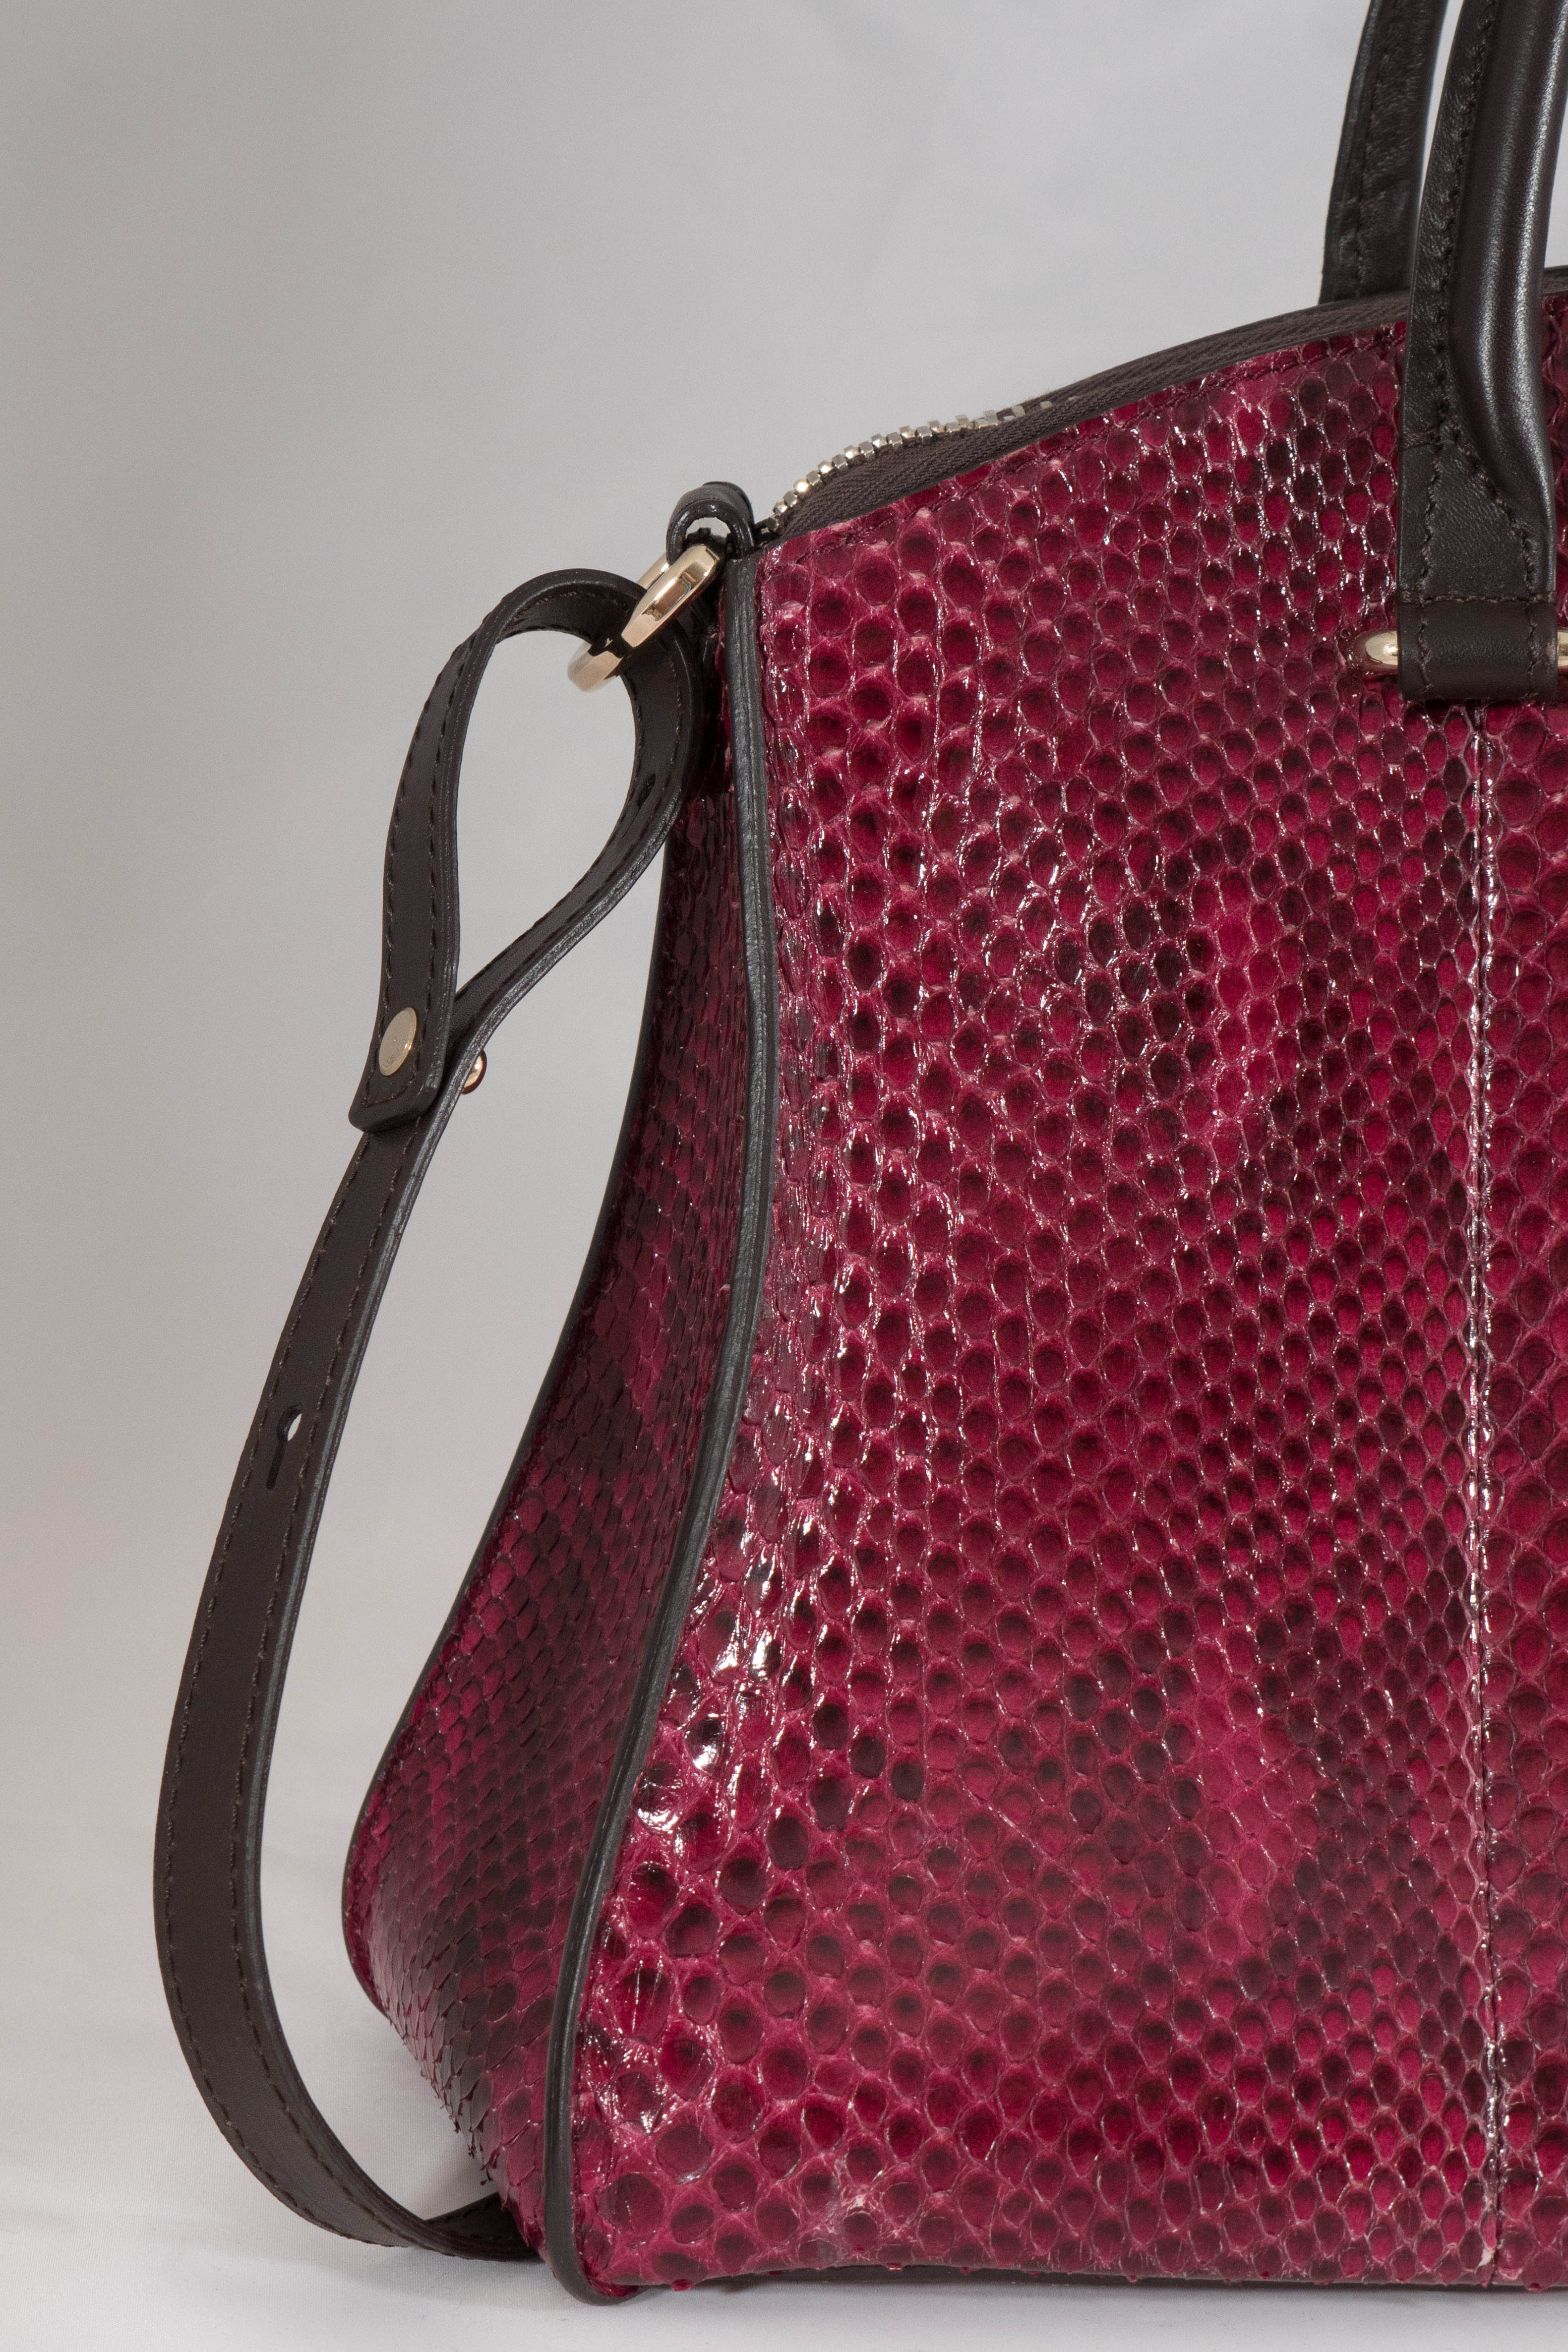 VBH Trevi Siny Wine Python Top Handle Tote In New Condition For Sale In New York, NY